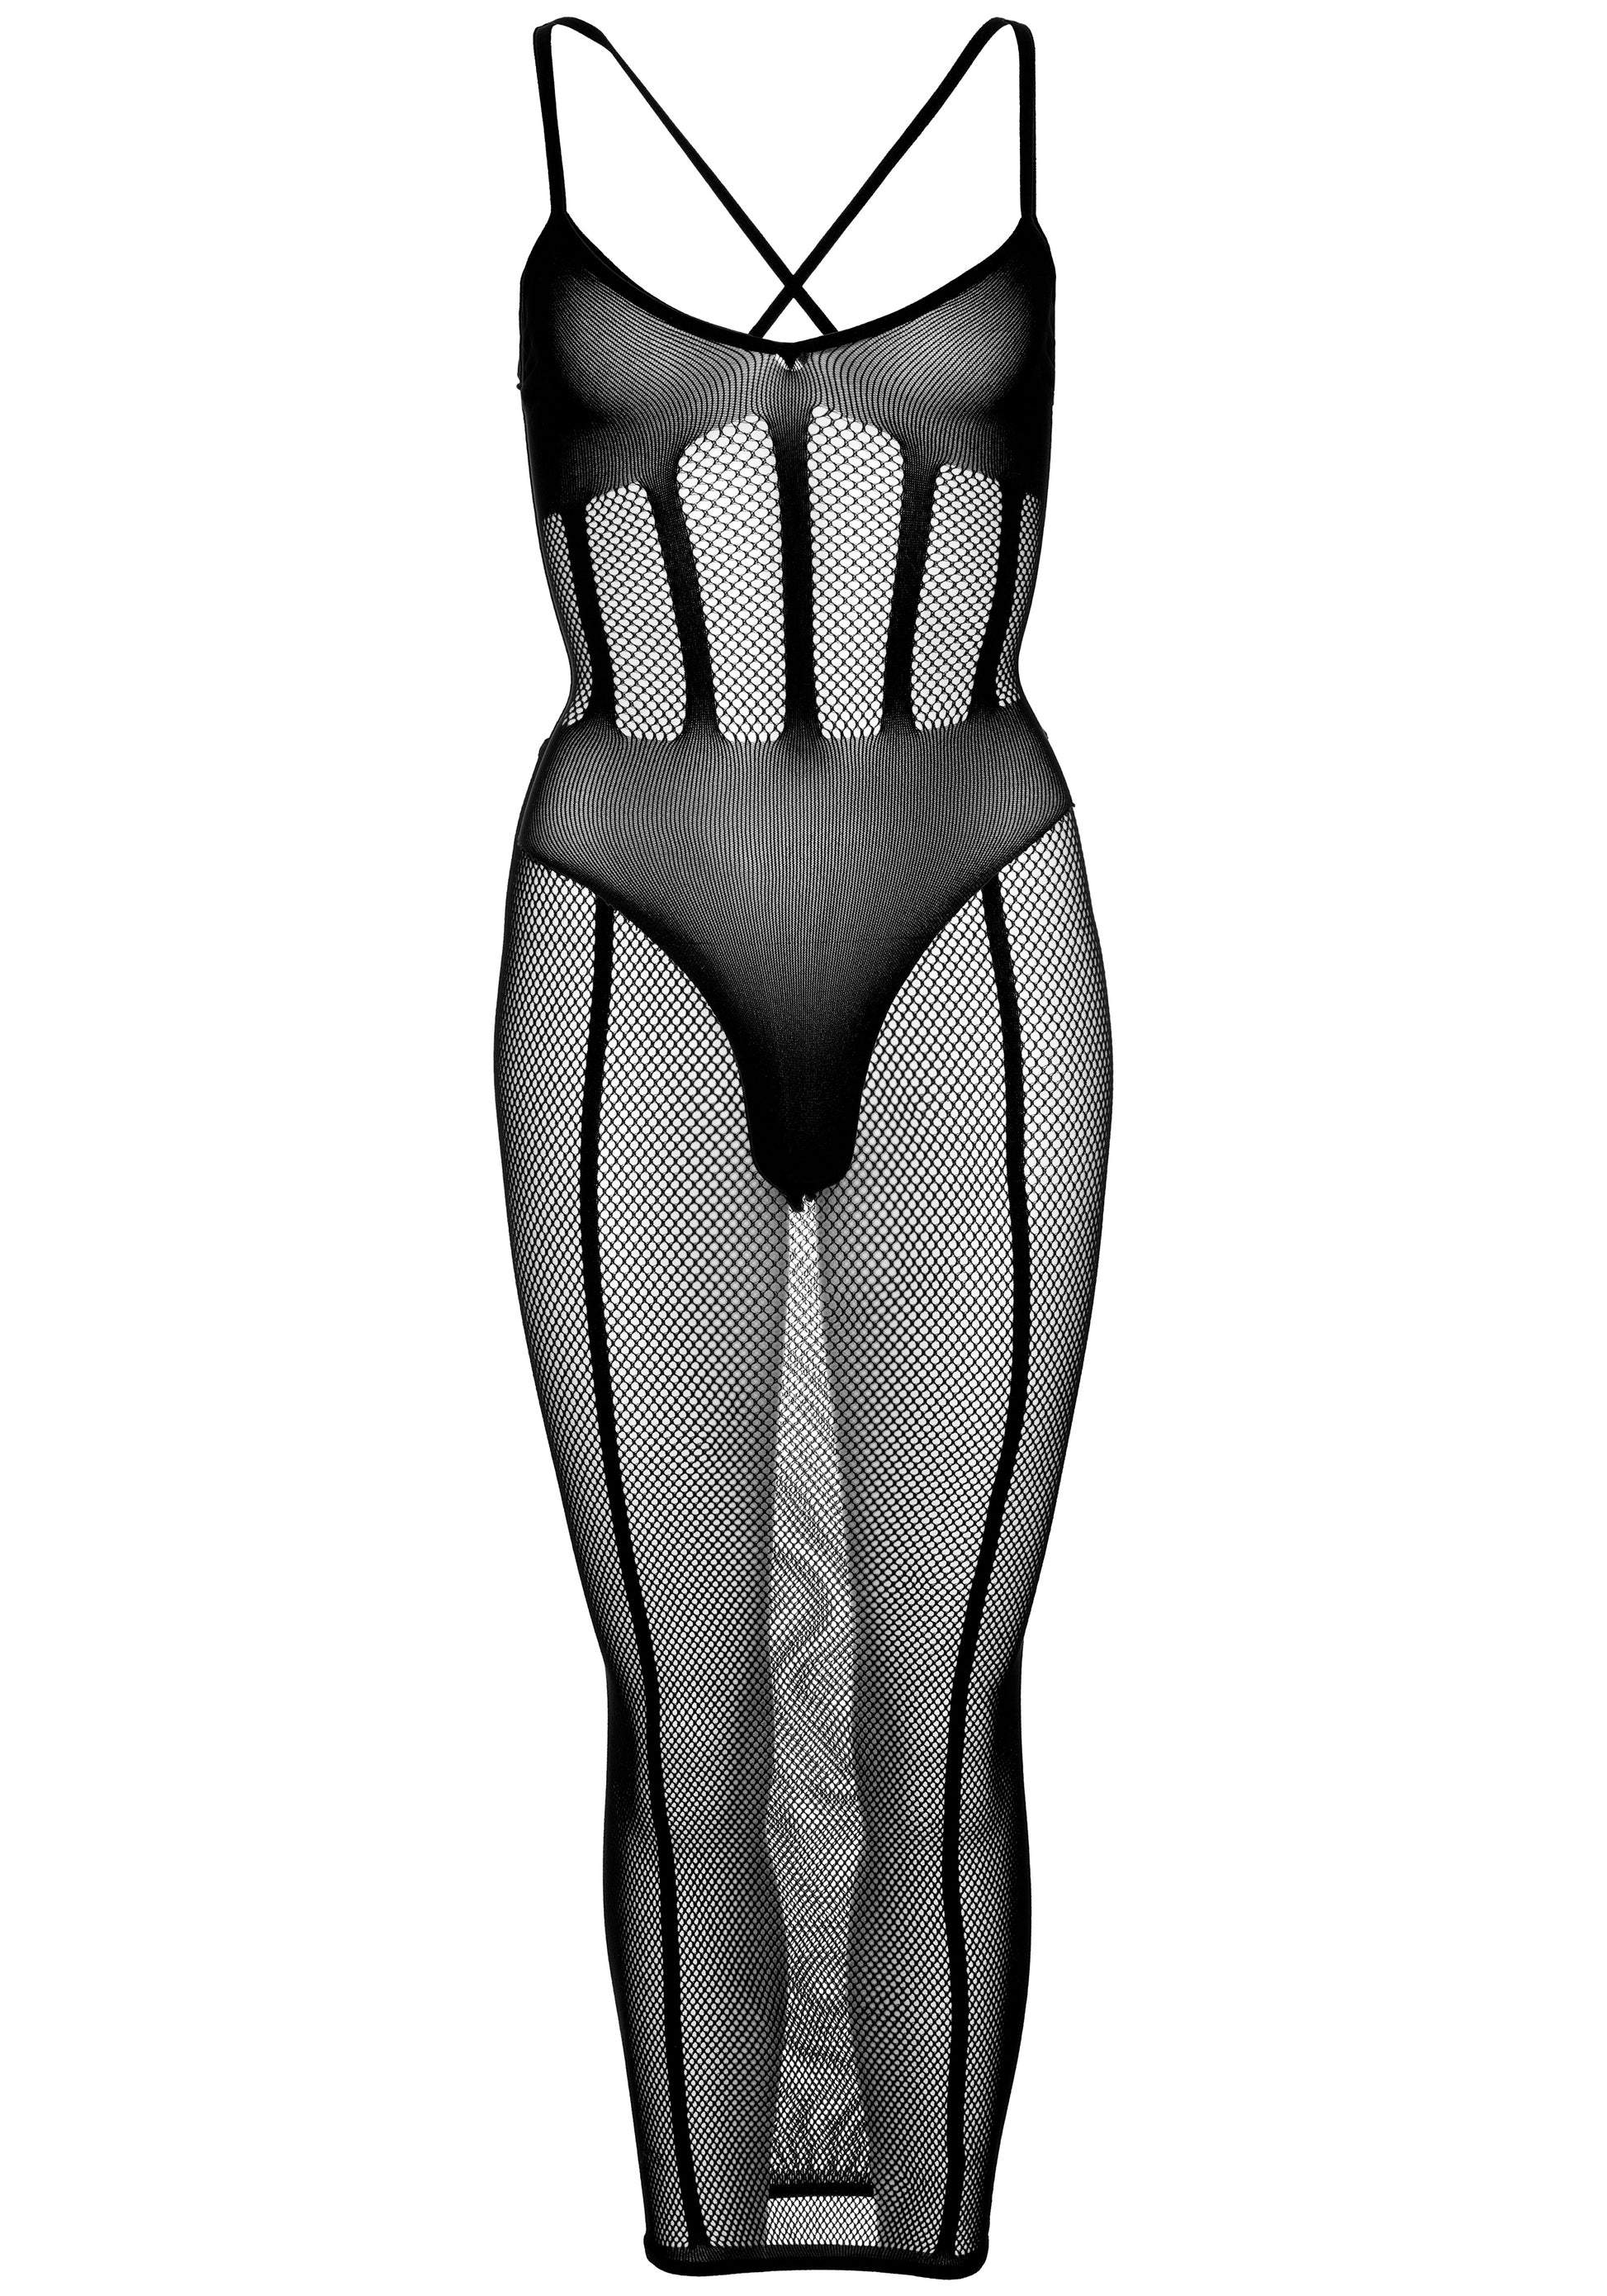 Leg Avenue 86967 Bodysuit & Skirt Set - Black fishnet body-top with thin criss-cross straps, opaque bra and thong panels and vertical stripes and matching midi fishnet skirt.